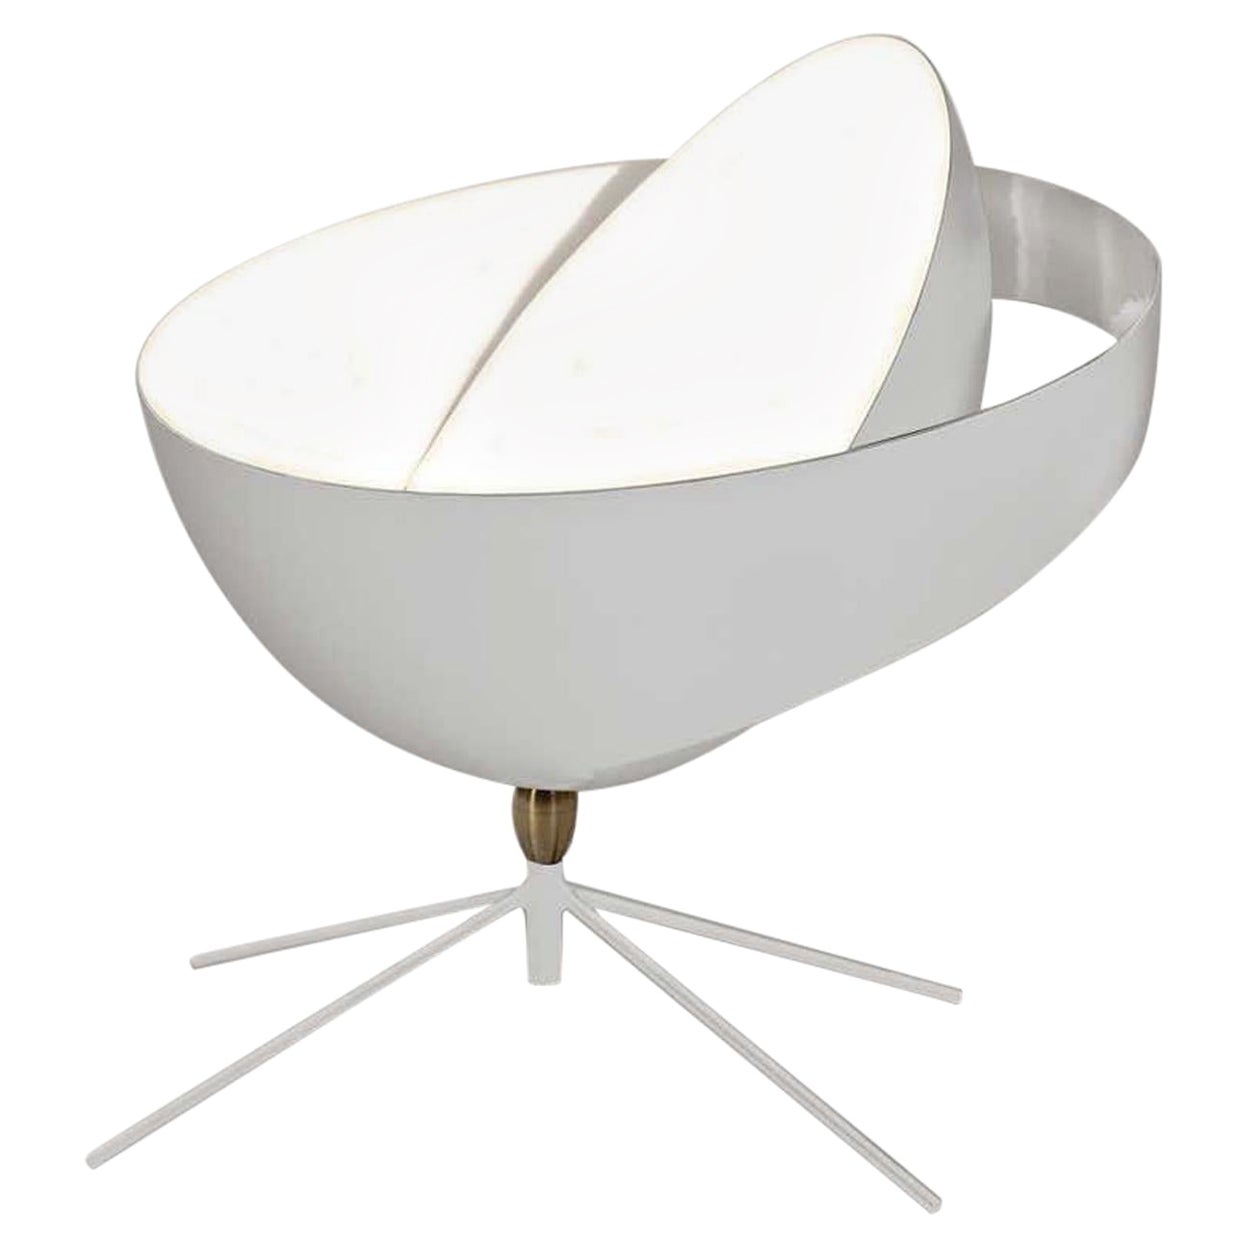 Serge Mouille "Saturn" Table Lamp in White For Sale